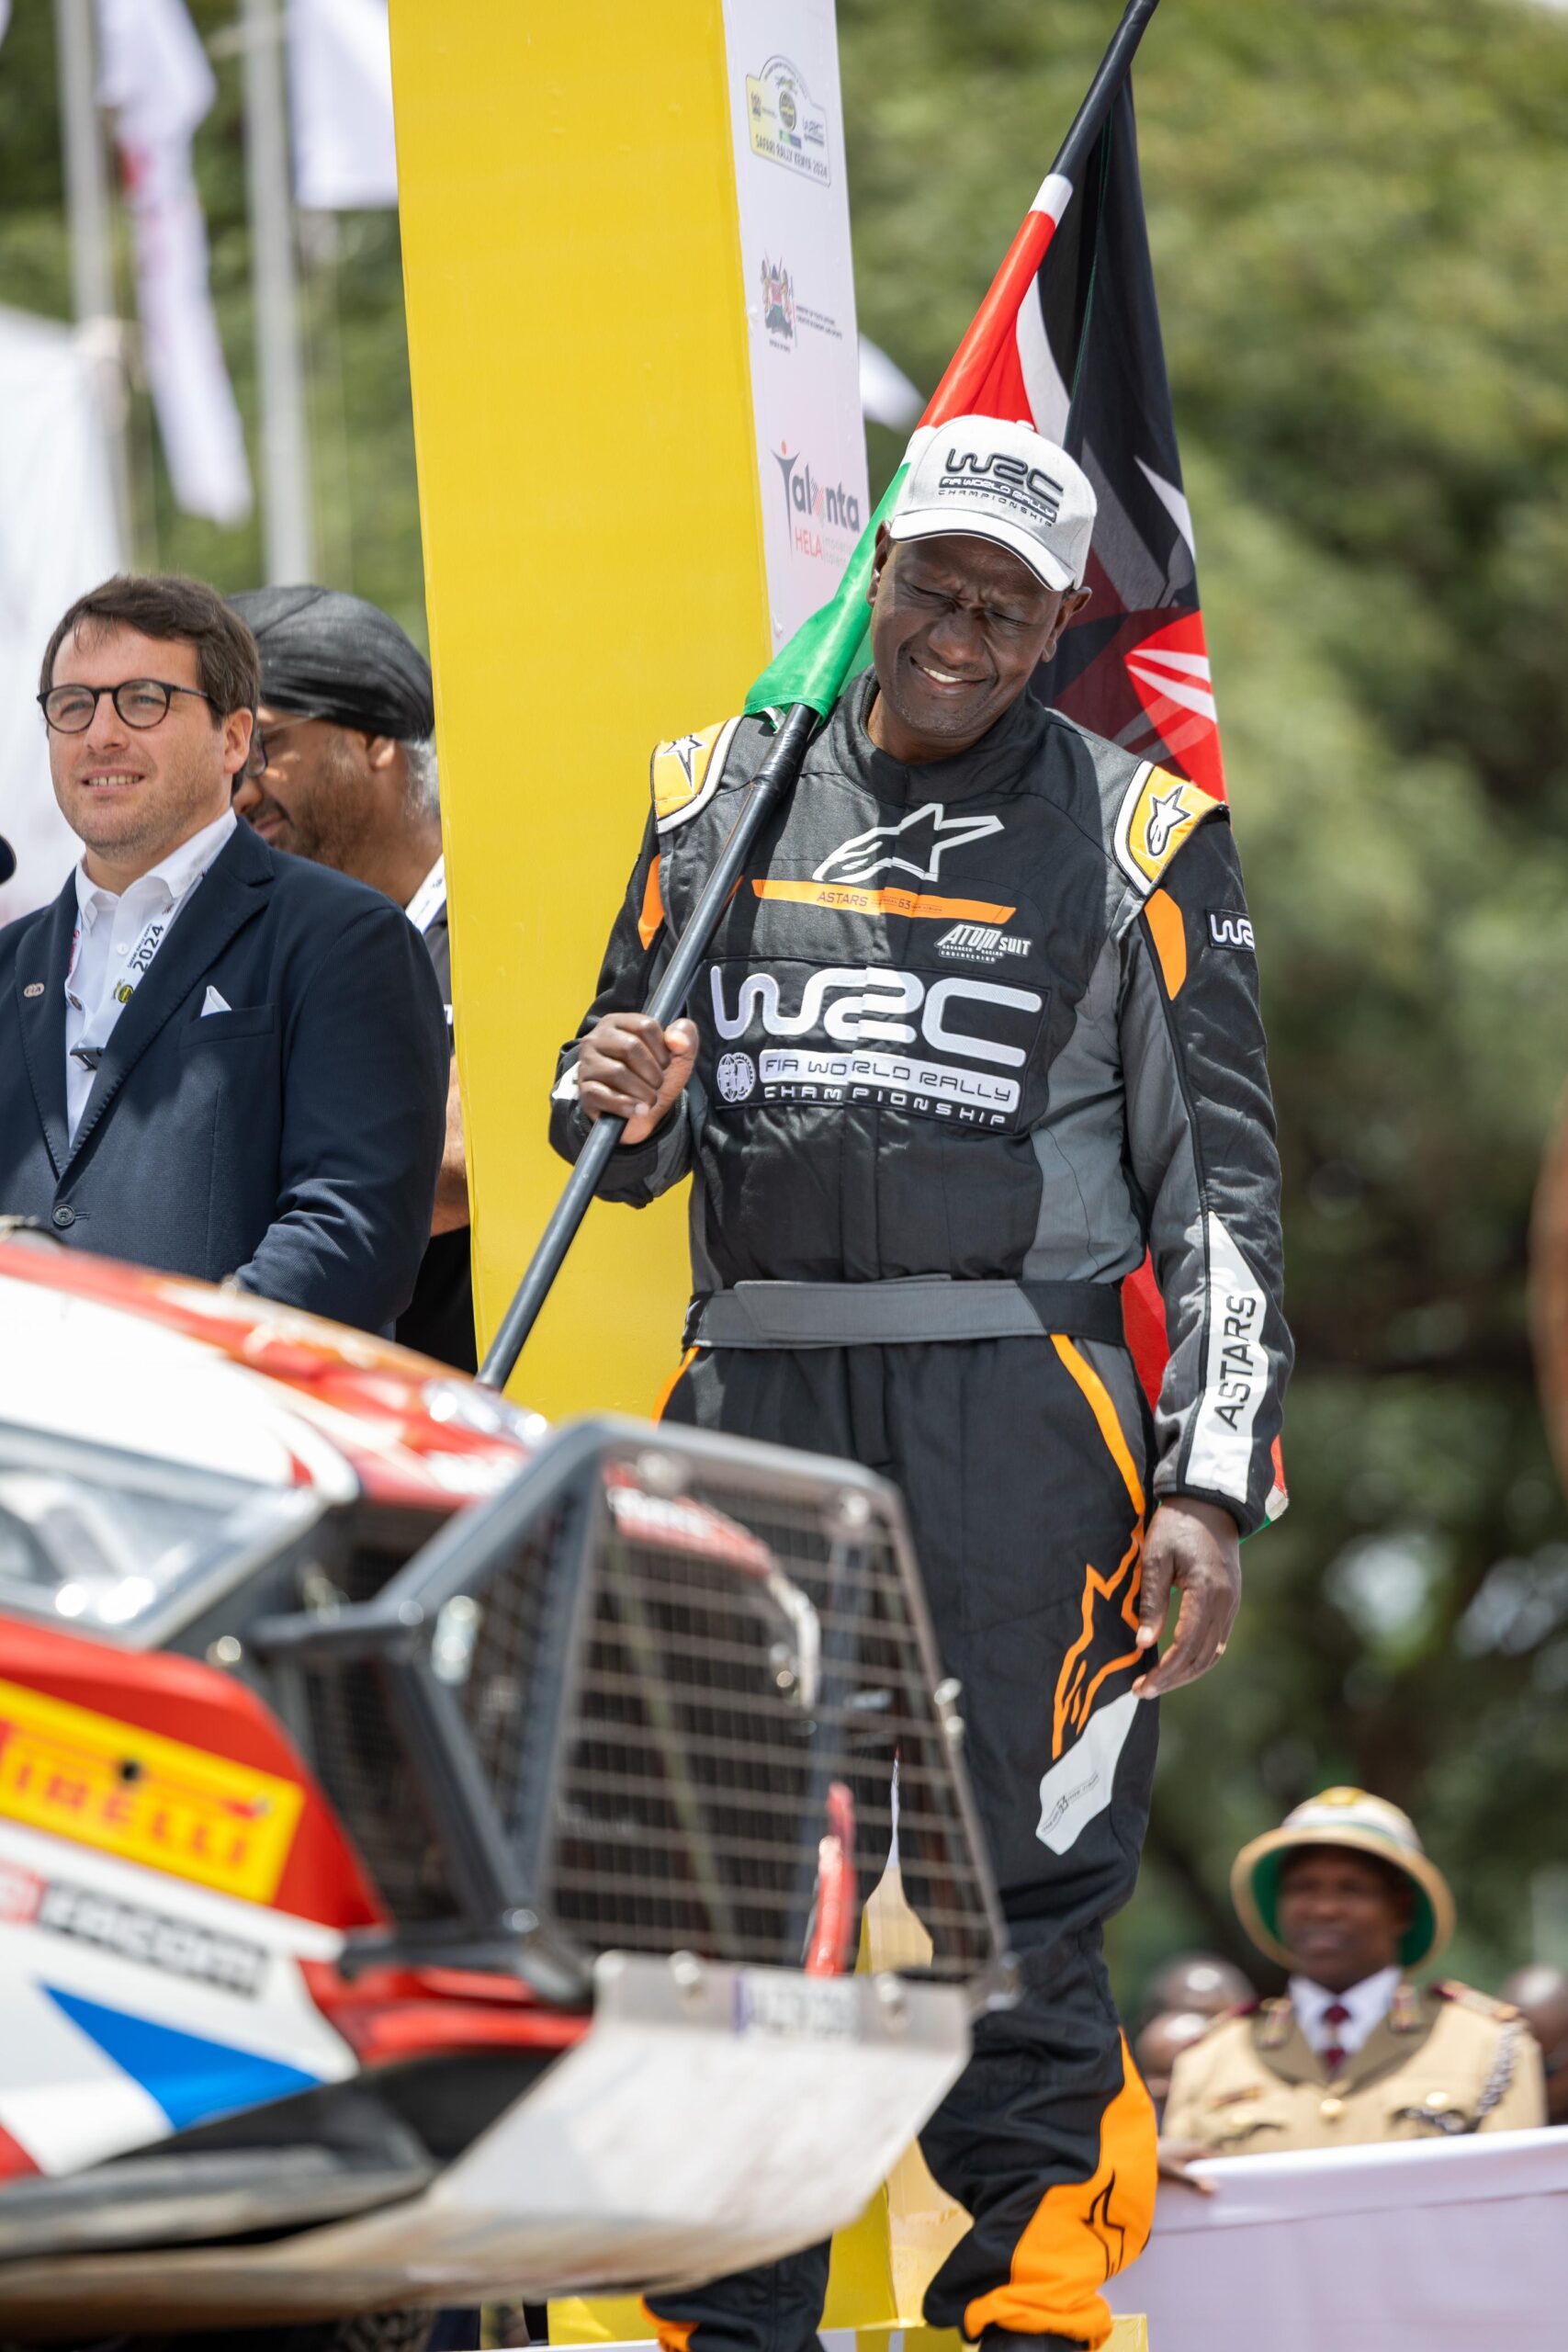 Safari Rally To Be Extended To Five Days, Ruto Says